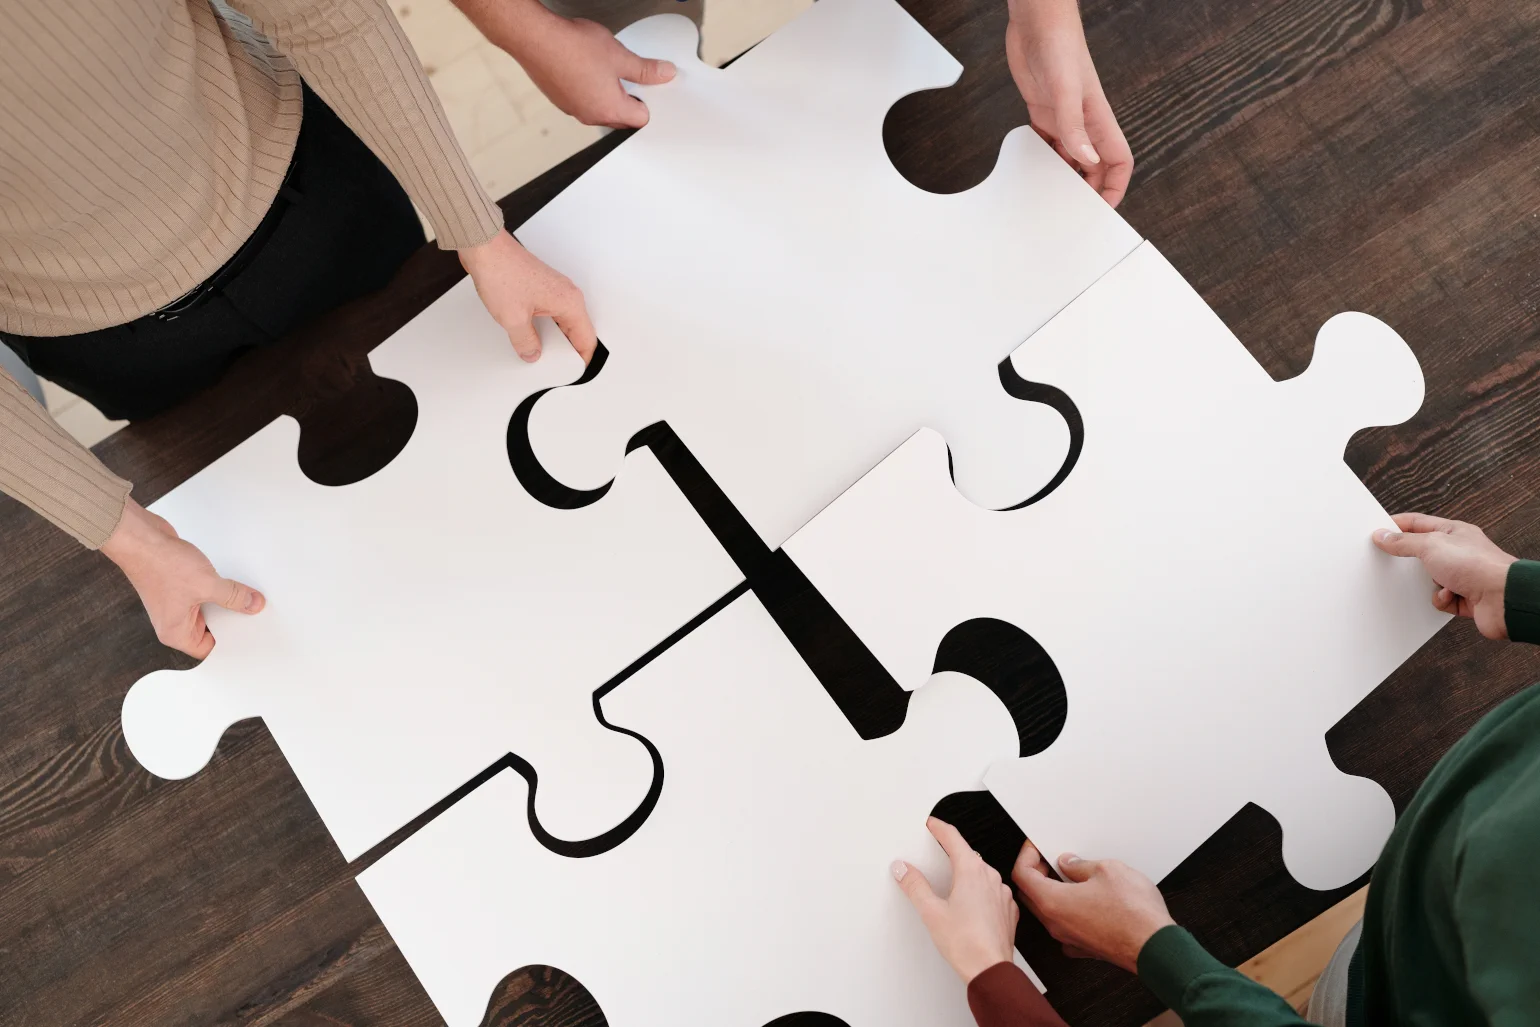 Overhead view of 4 people standing on opposite sides of a table holding huge puzzle pieces